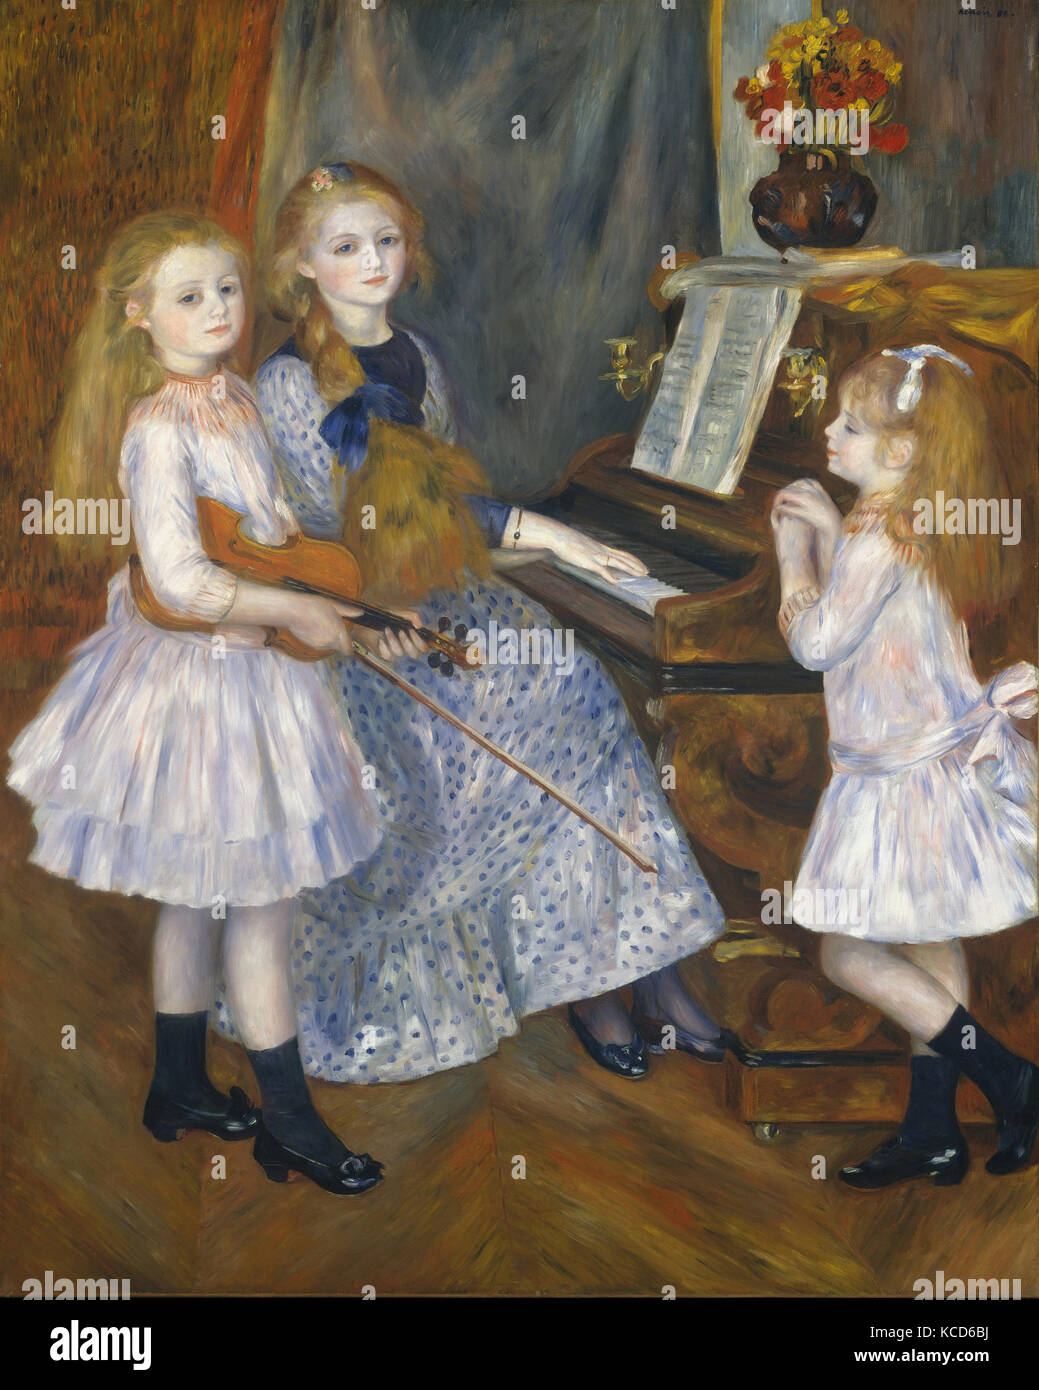 The Daughters of Catulle Mendès, Huguette (1871–1964), Claudine (1876–1937), and Helyonne (1879–1955), Auguste Renoir, 1888 Stock Photo